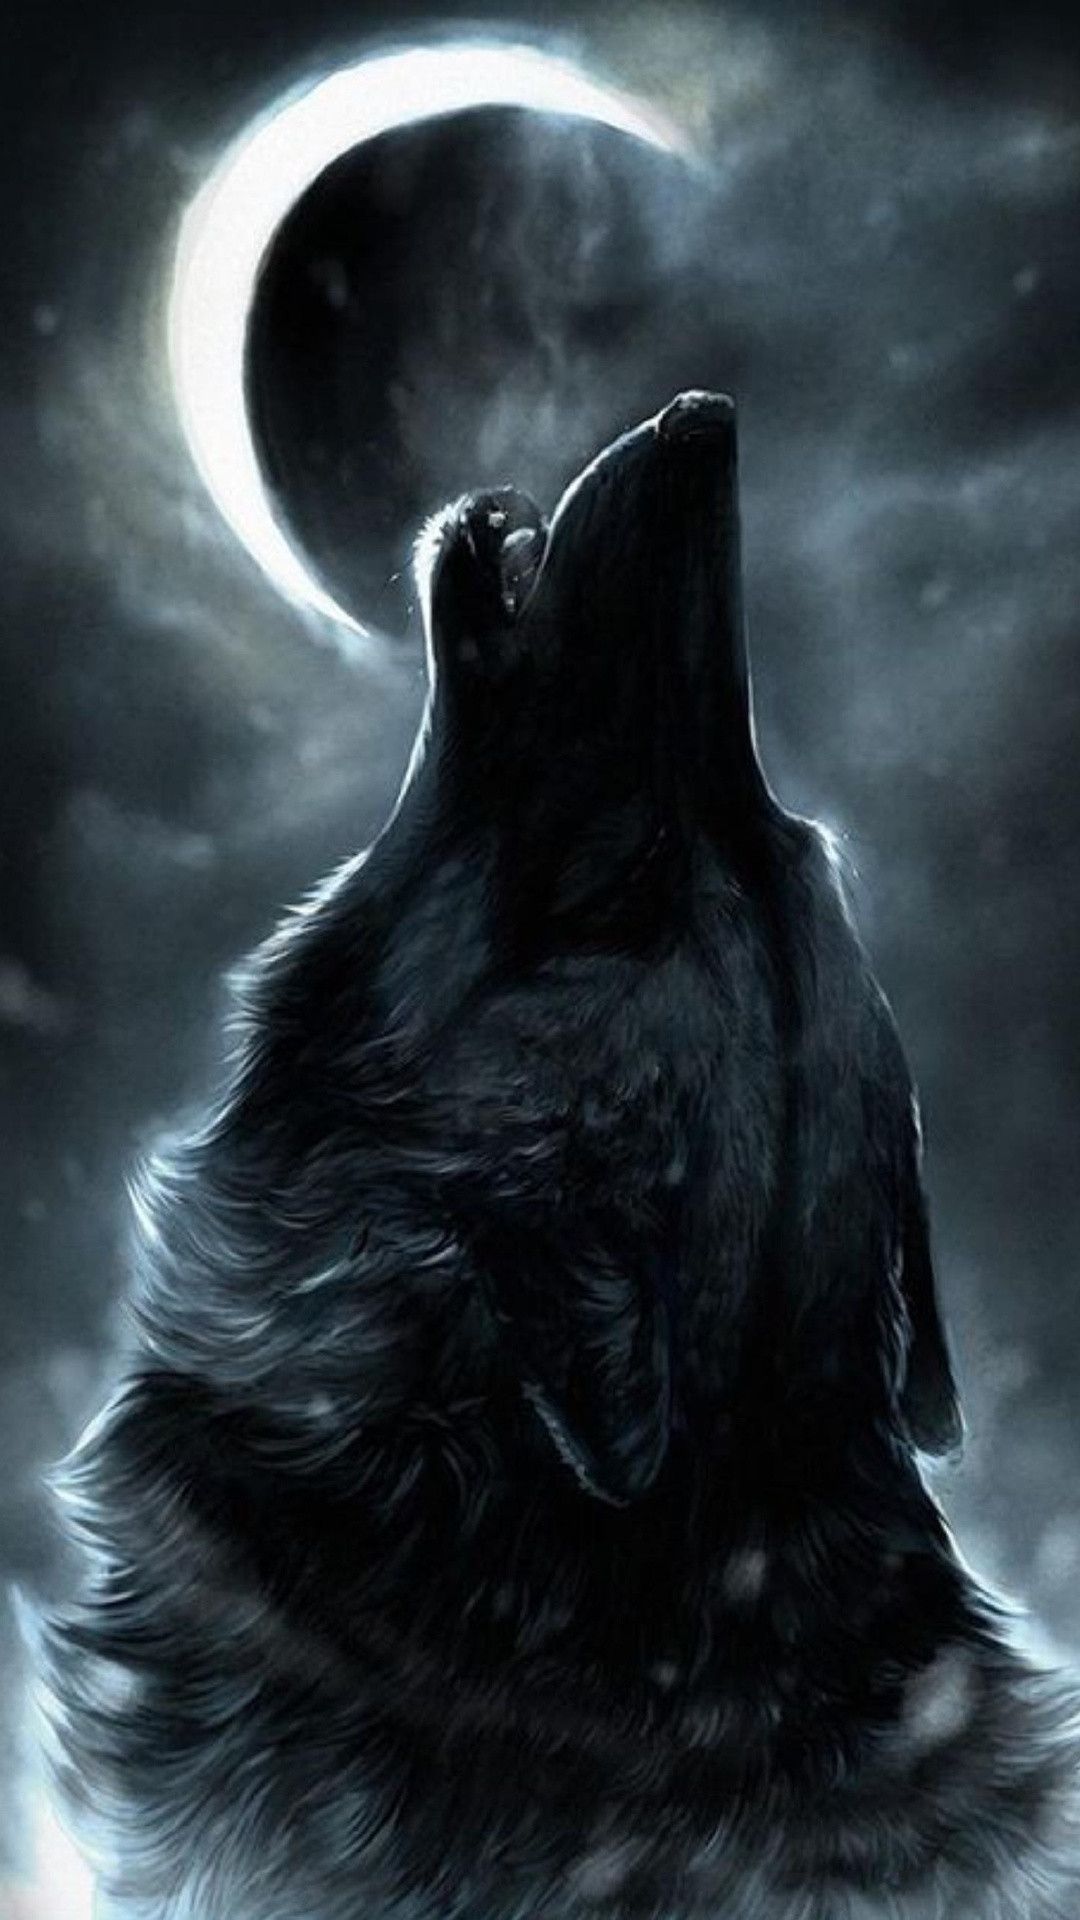 1080x Download Previewhowling Wolf Wallpaper Wolf Howling At The Moon